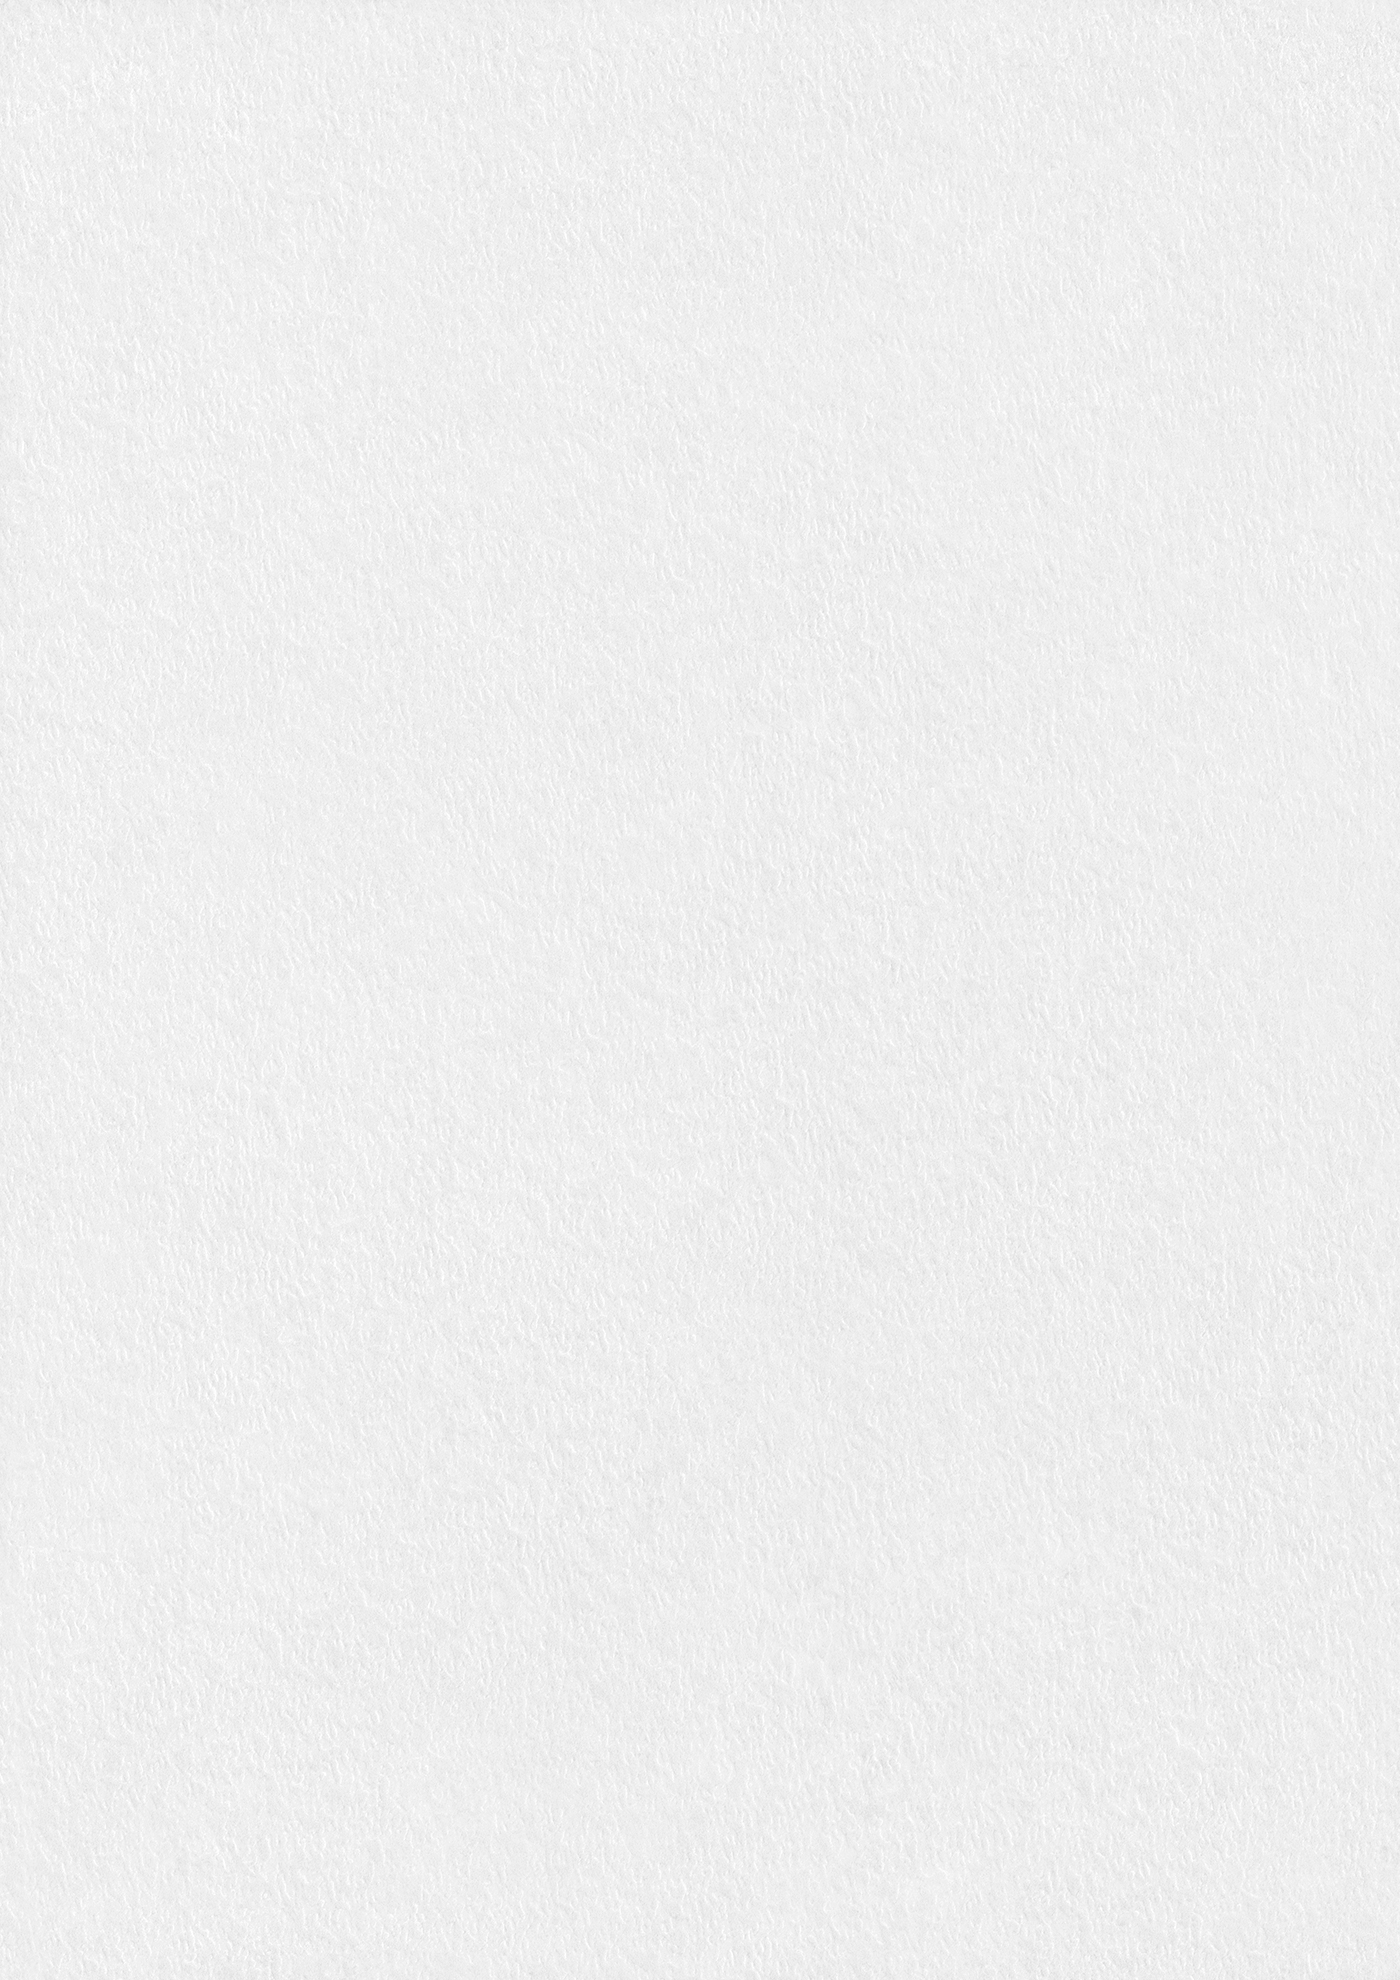 paper textures backgrounds White white paper